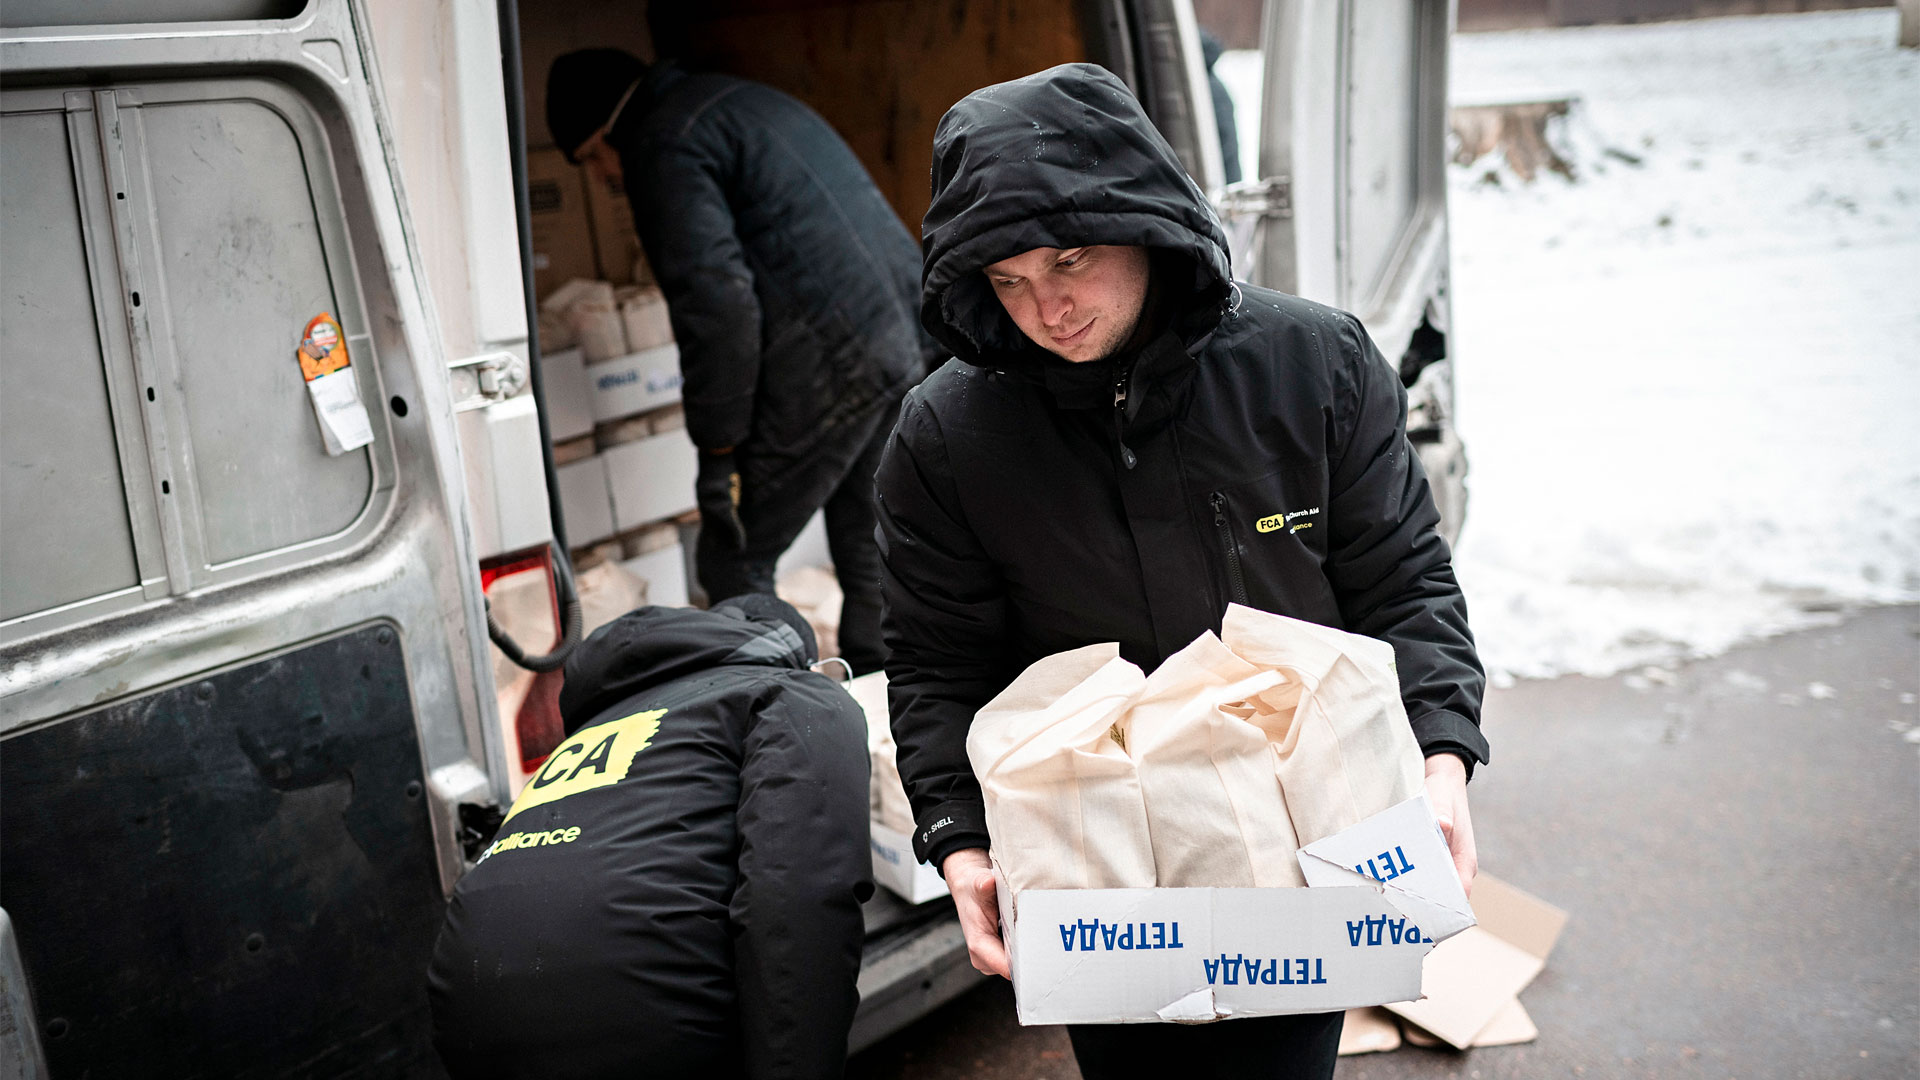 A person in a hooded winter jacket unloads bags of items from a packed van. The jacket bears the logo of FCA.